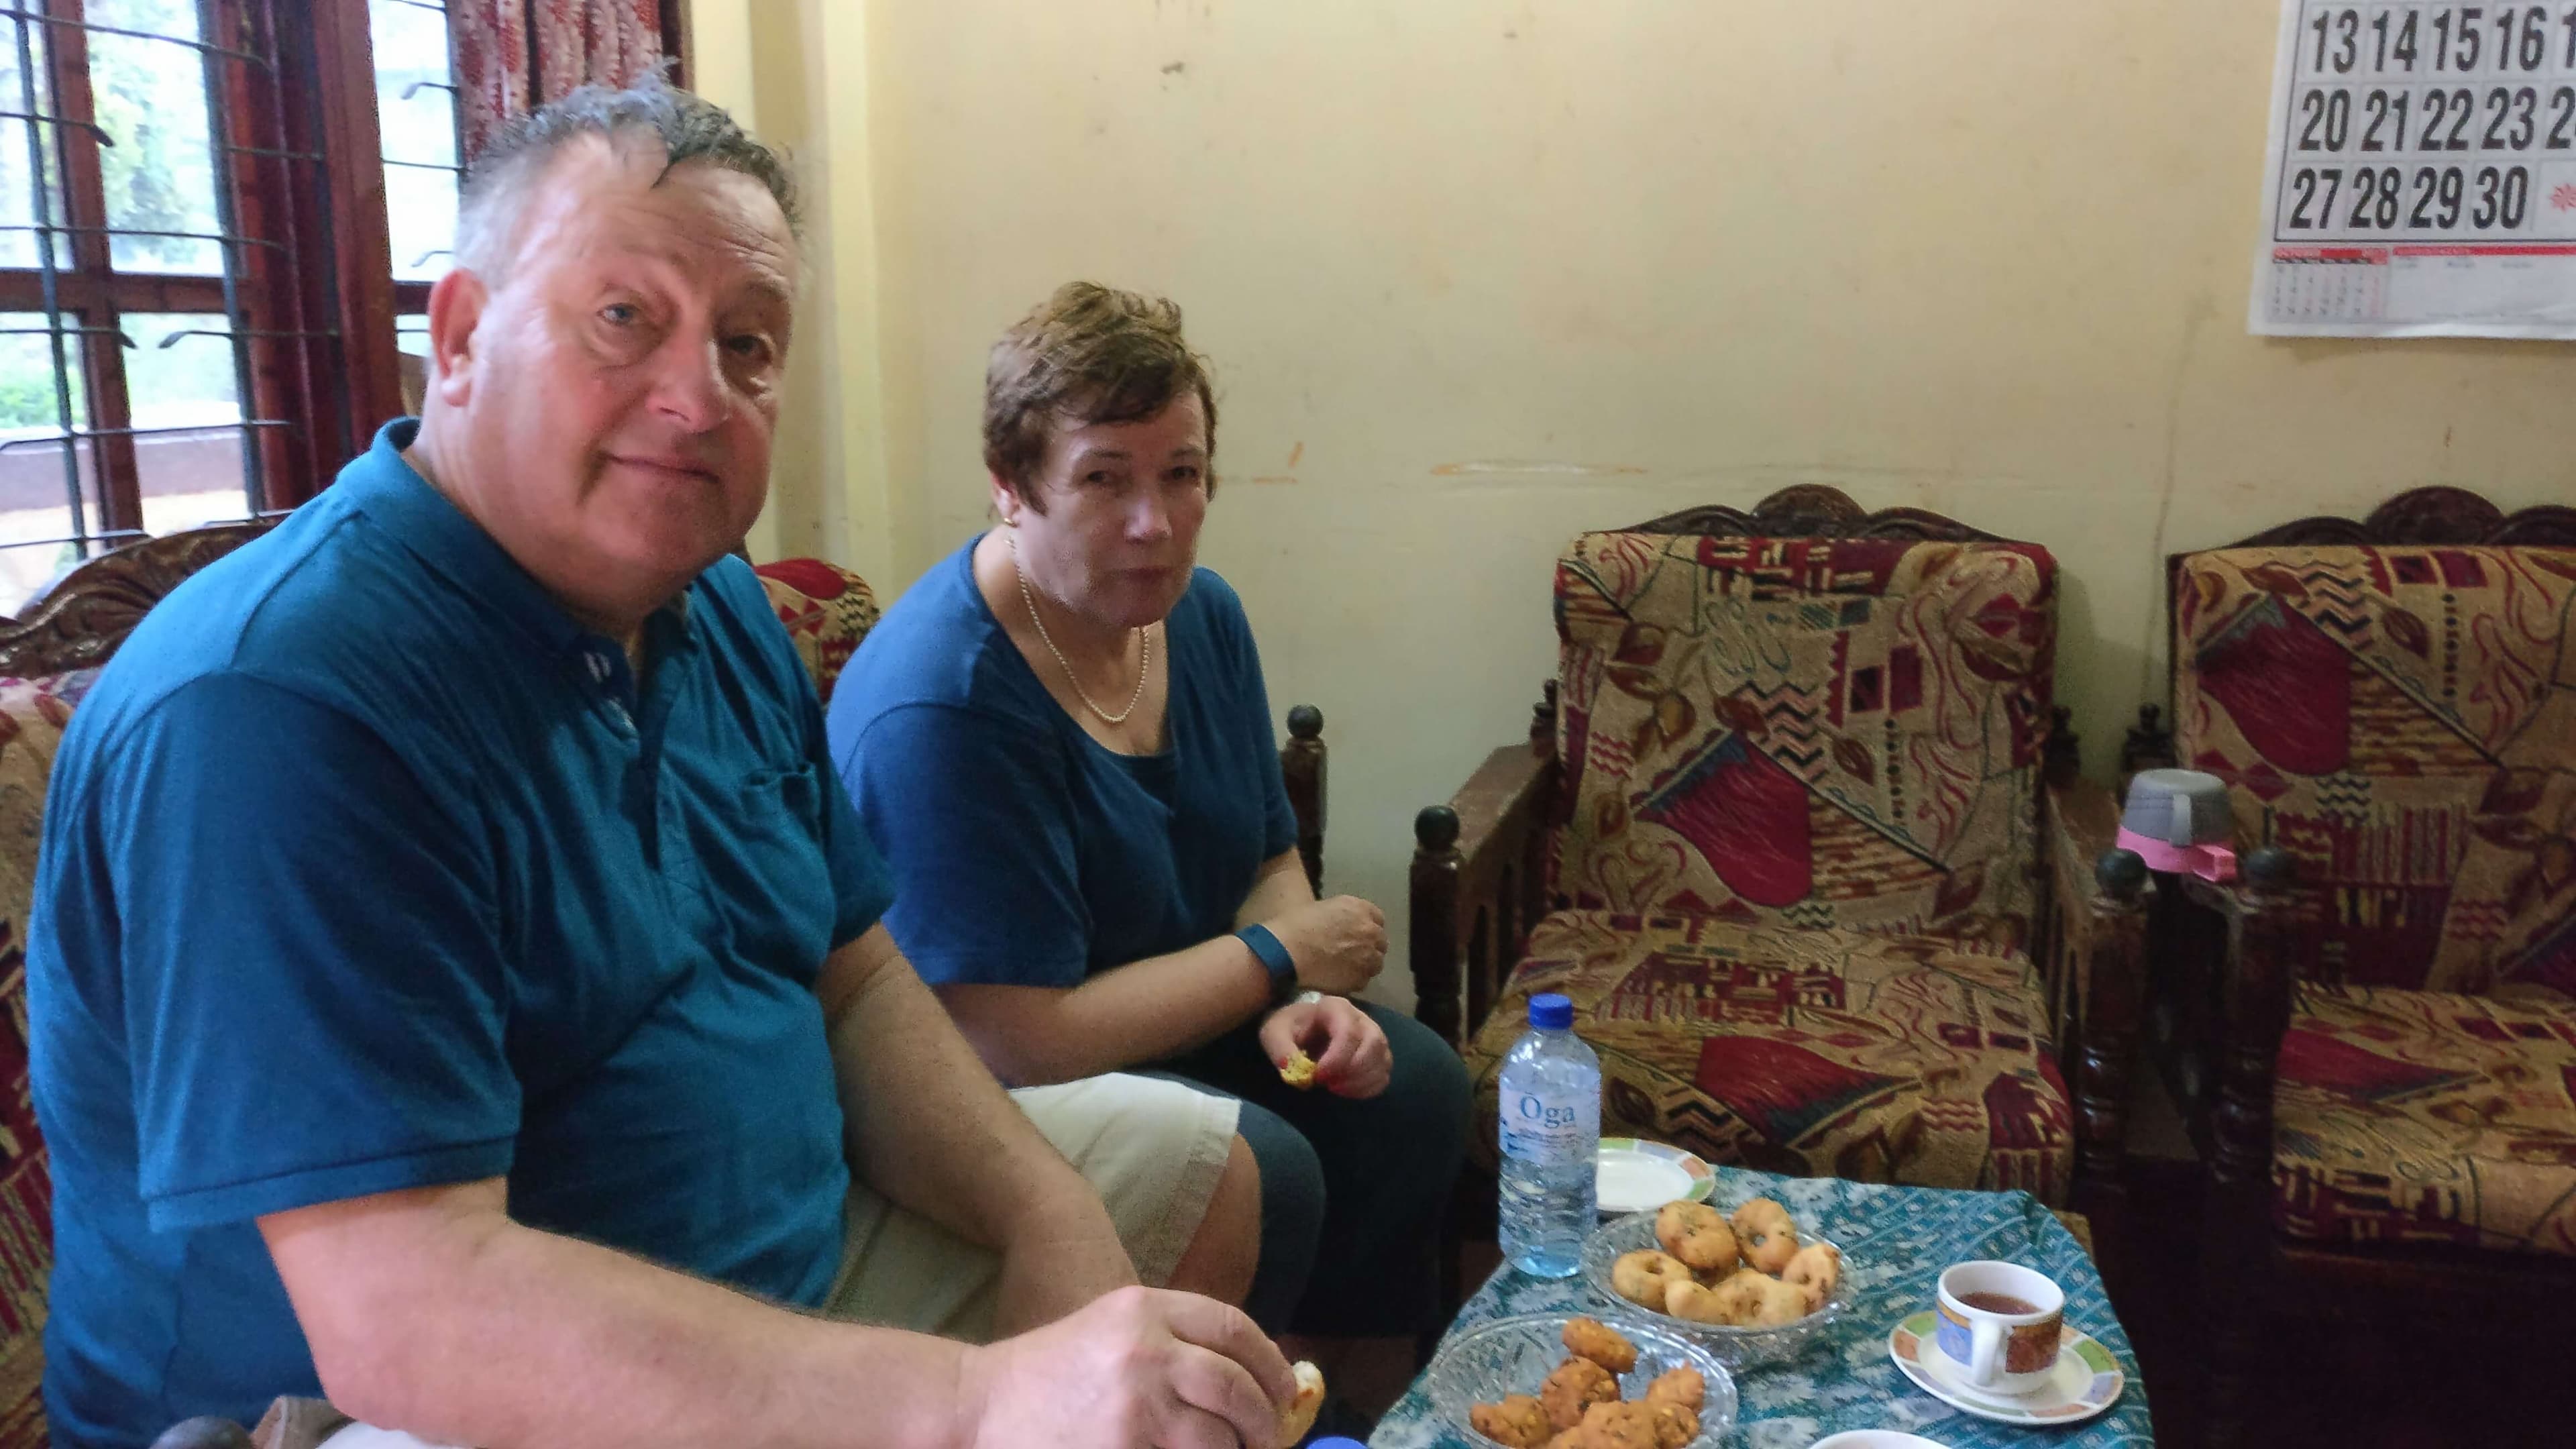 Tourists visit “Line-houses” taste traditional snack with hot tea in Kandy Sri Lanka